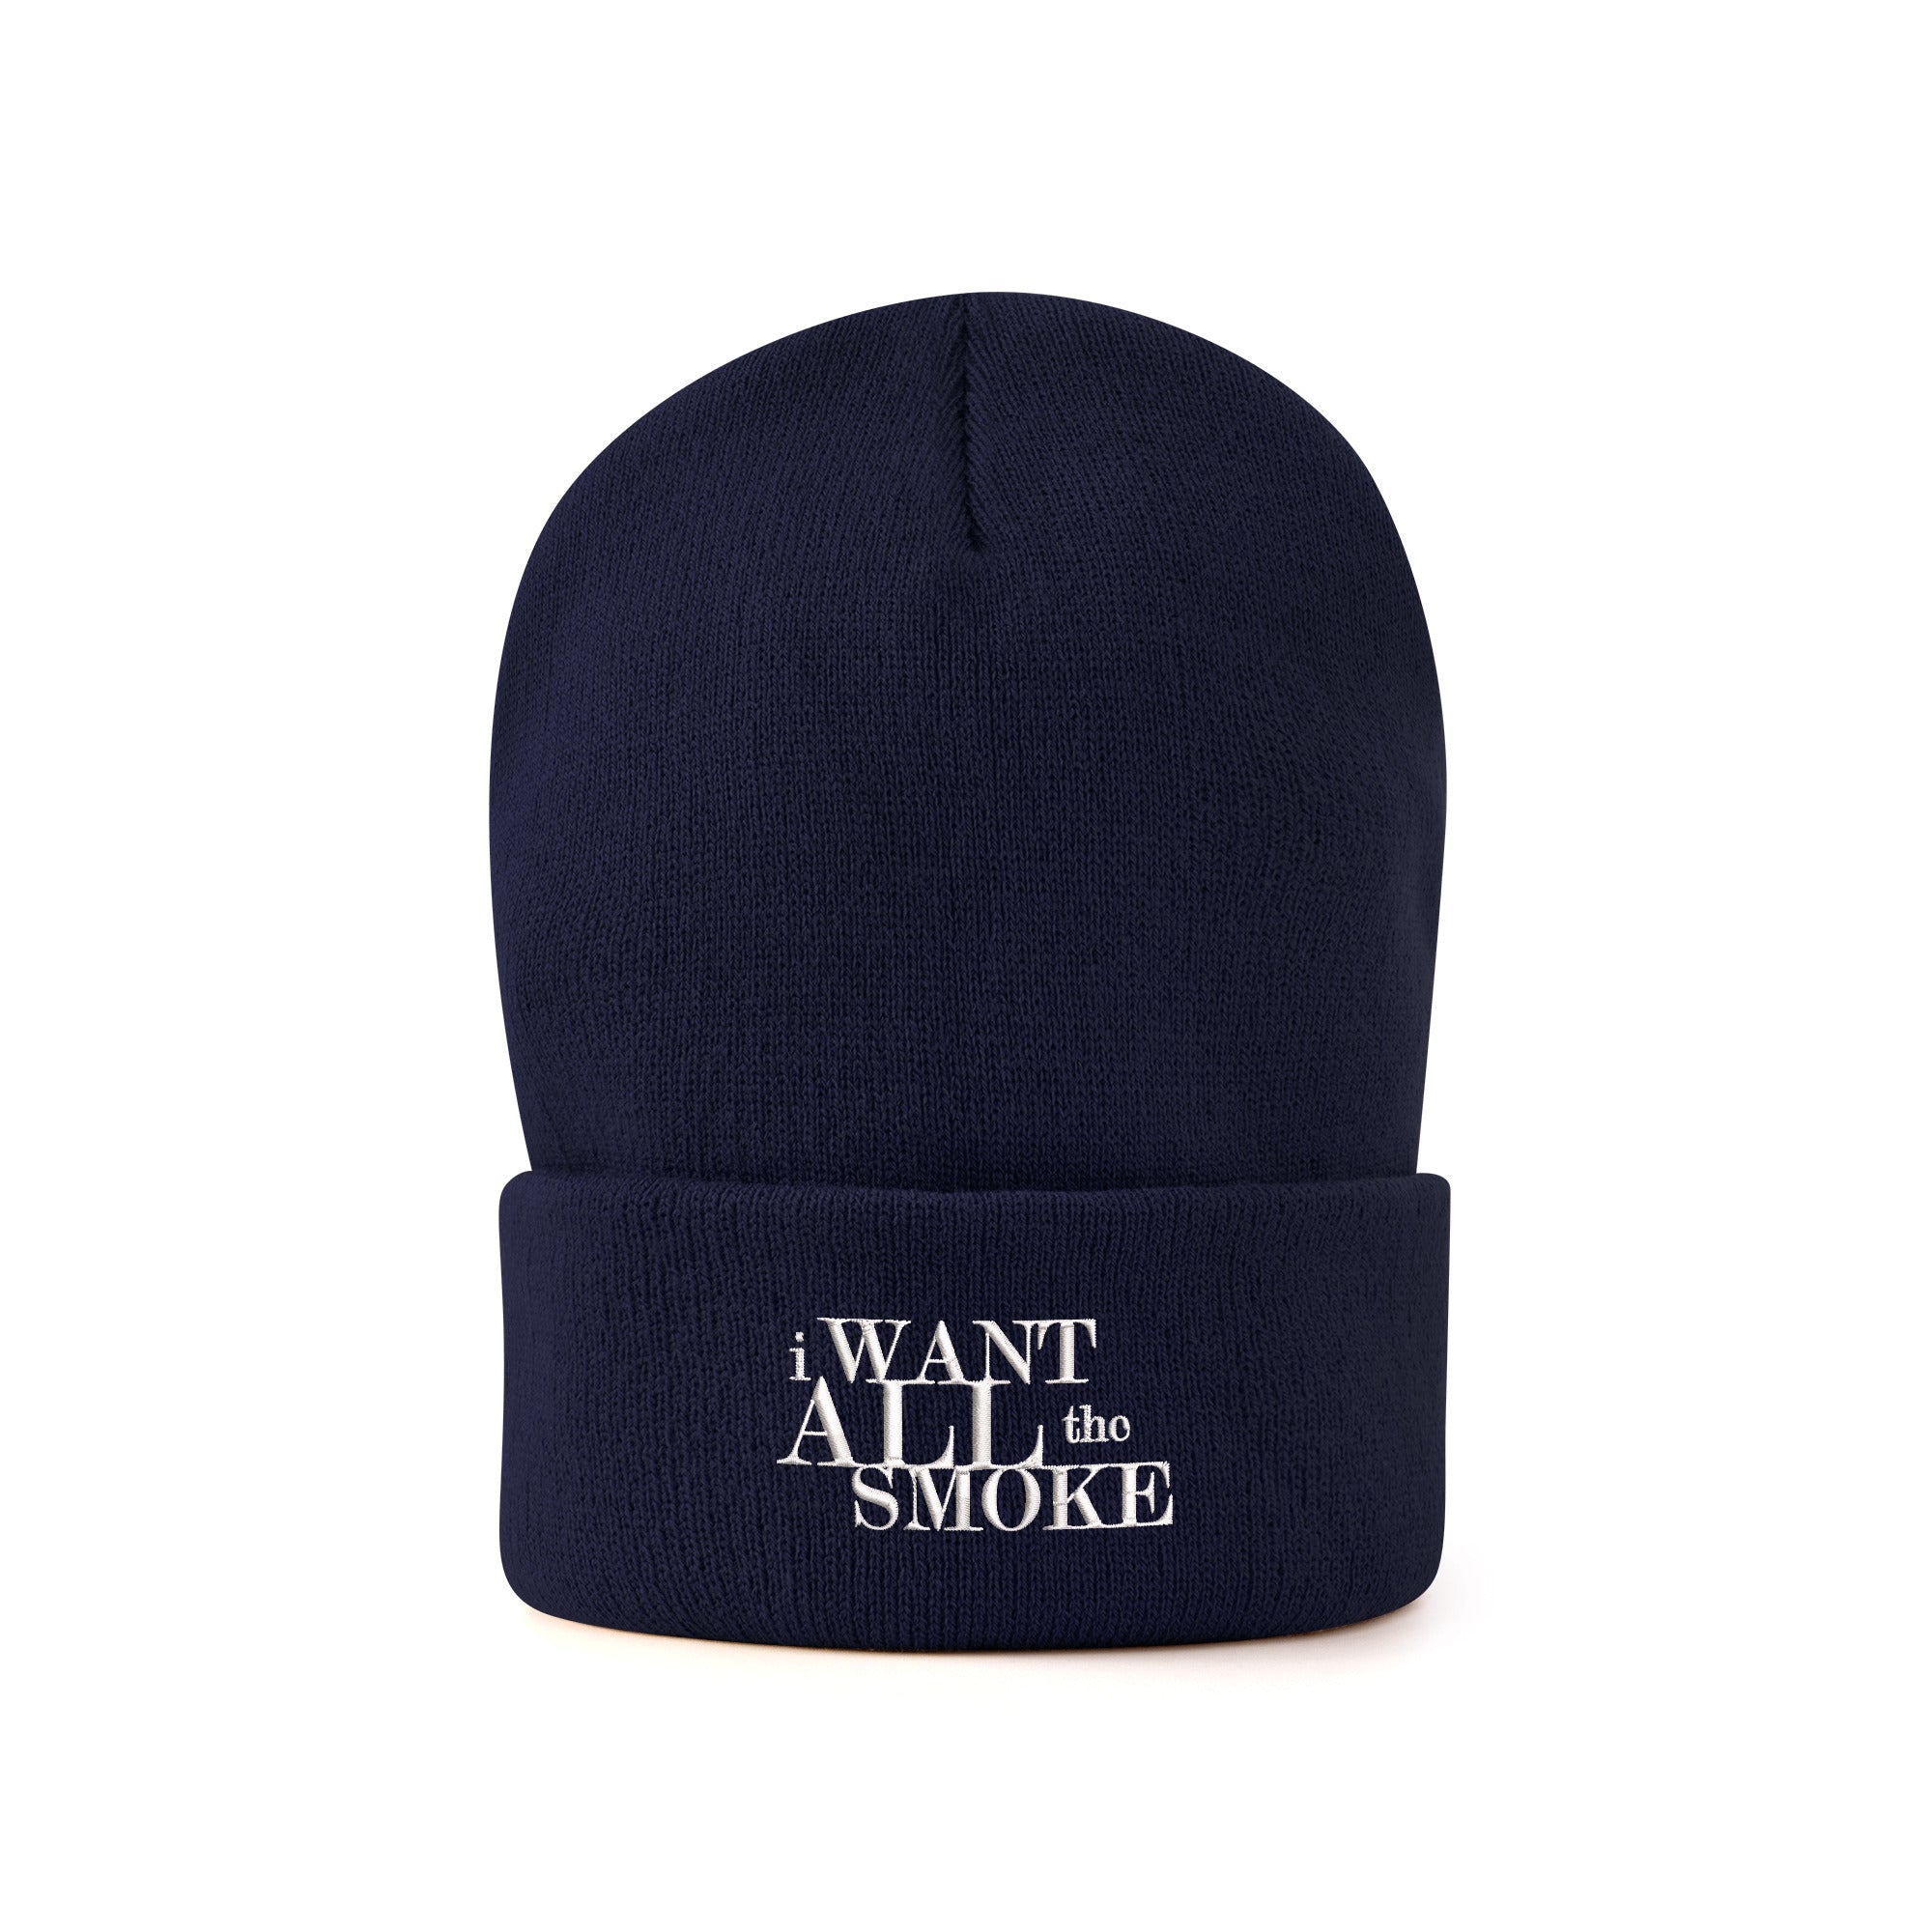 I Want All The Smoke Embroidered Knitted Hats